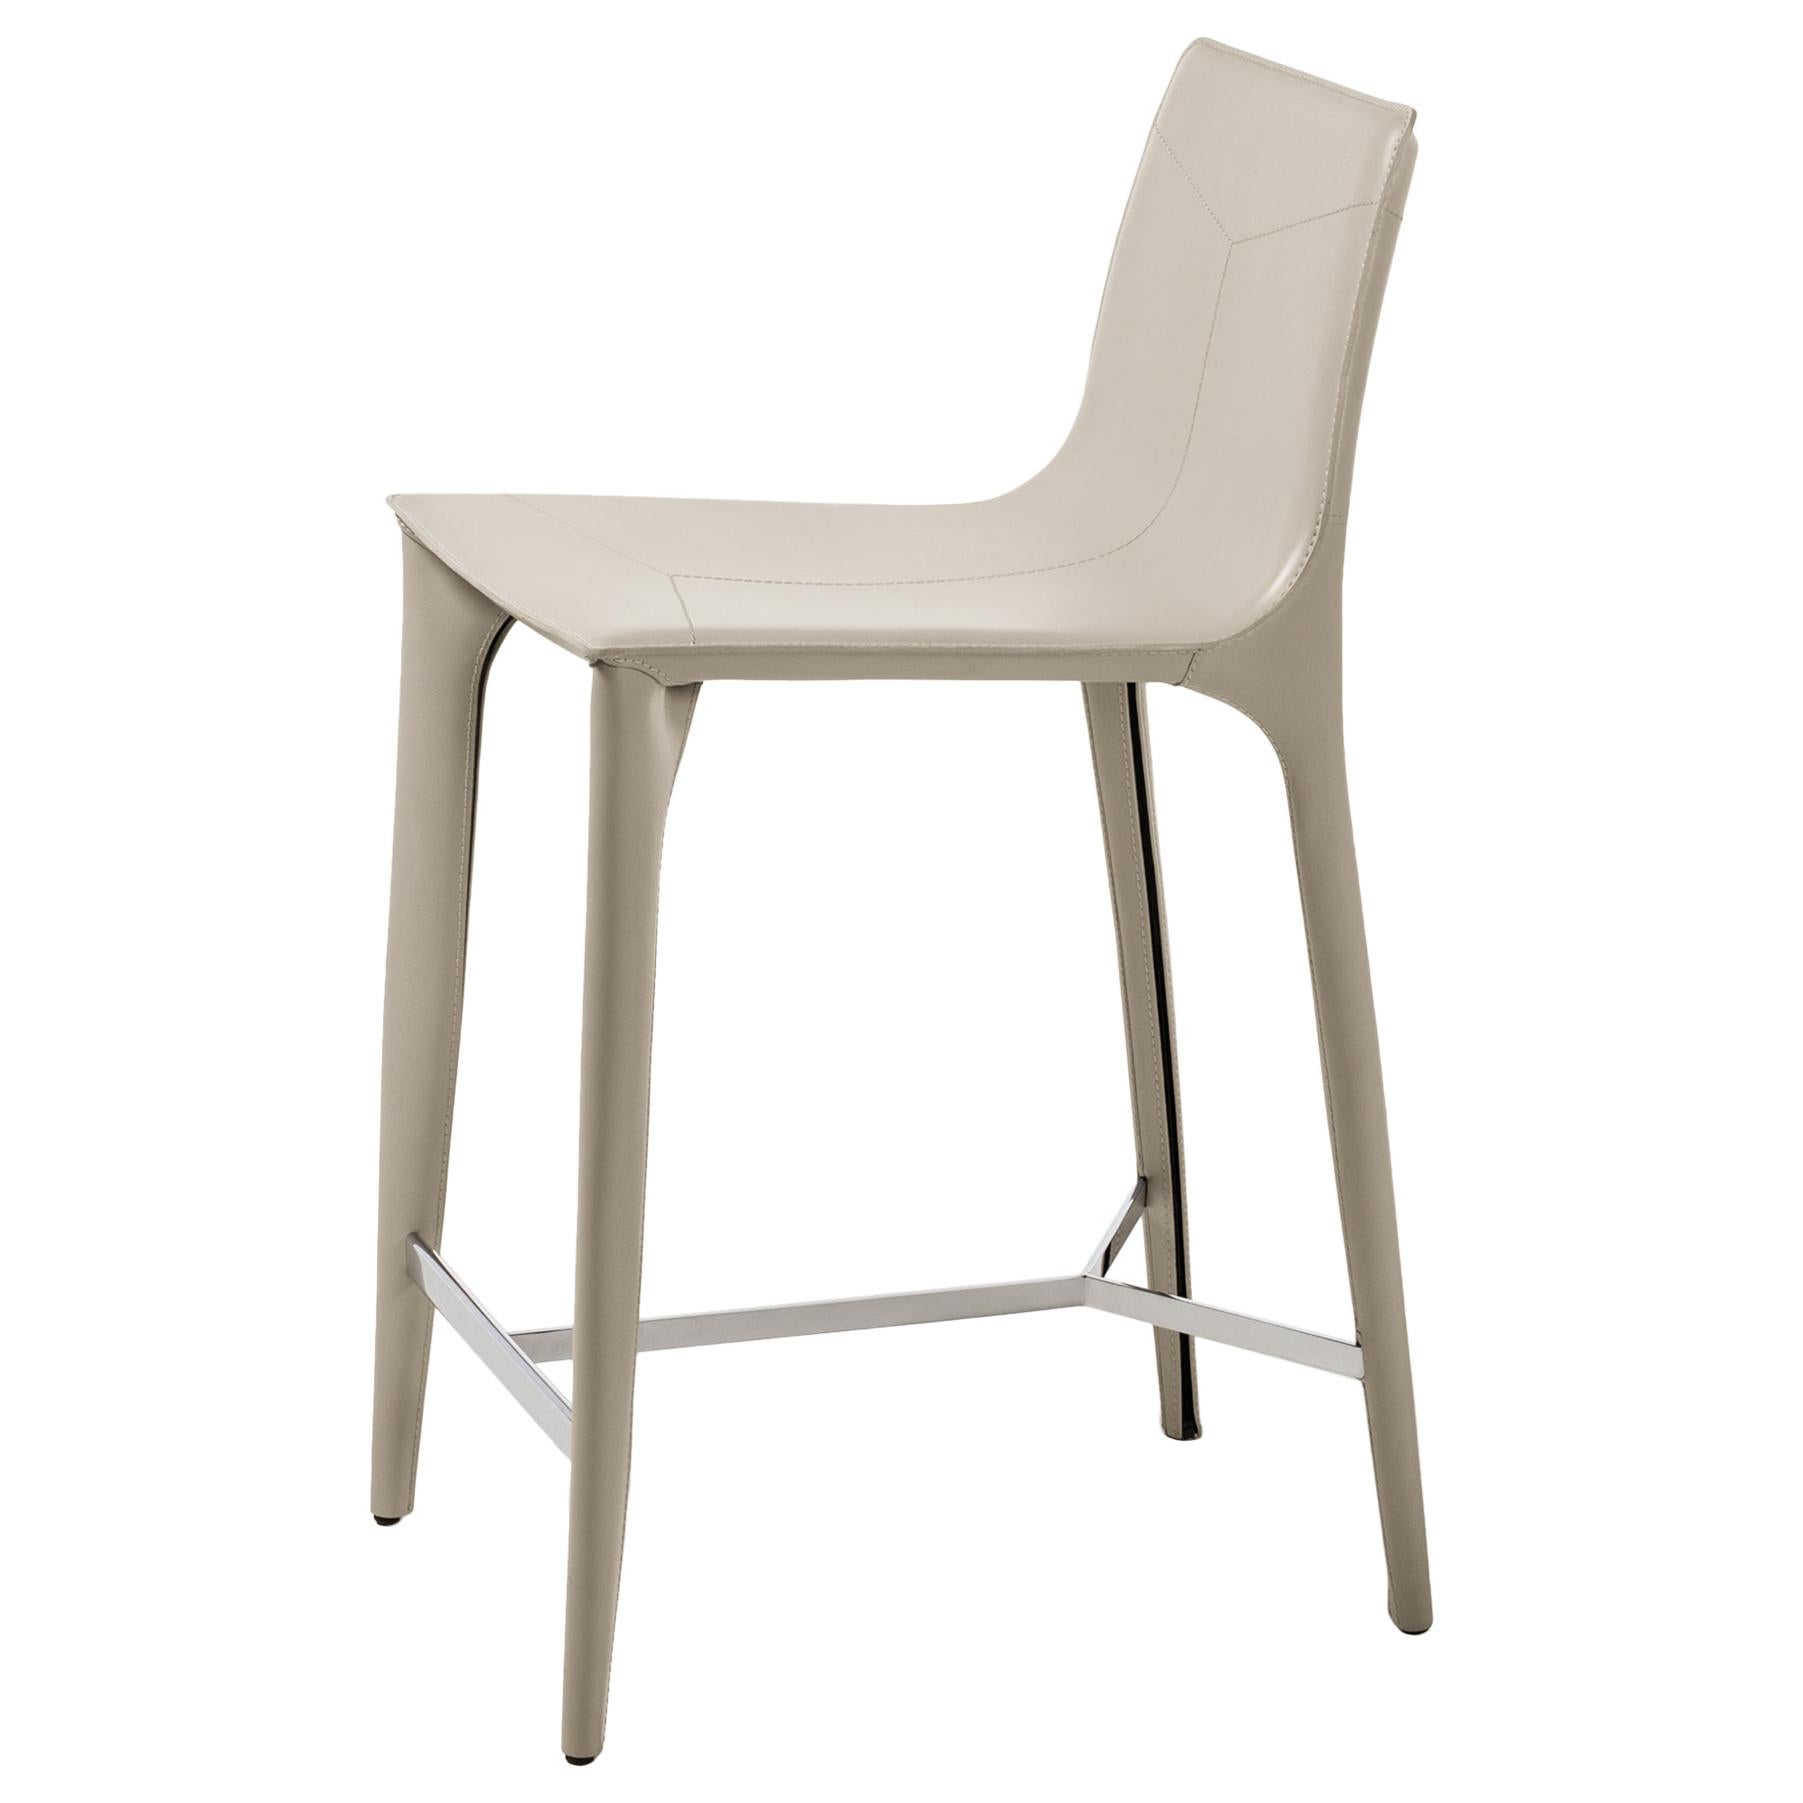 HOLLY HUNT Adriatic Counter Stool in Polished Chrome and Ice Grey Leather Finish